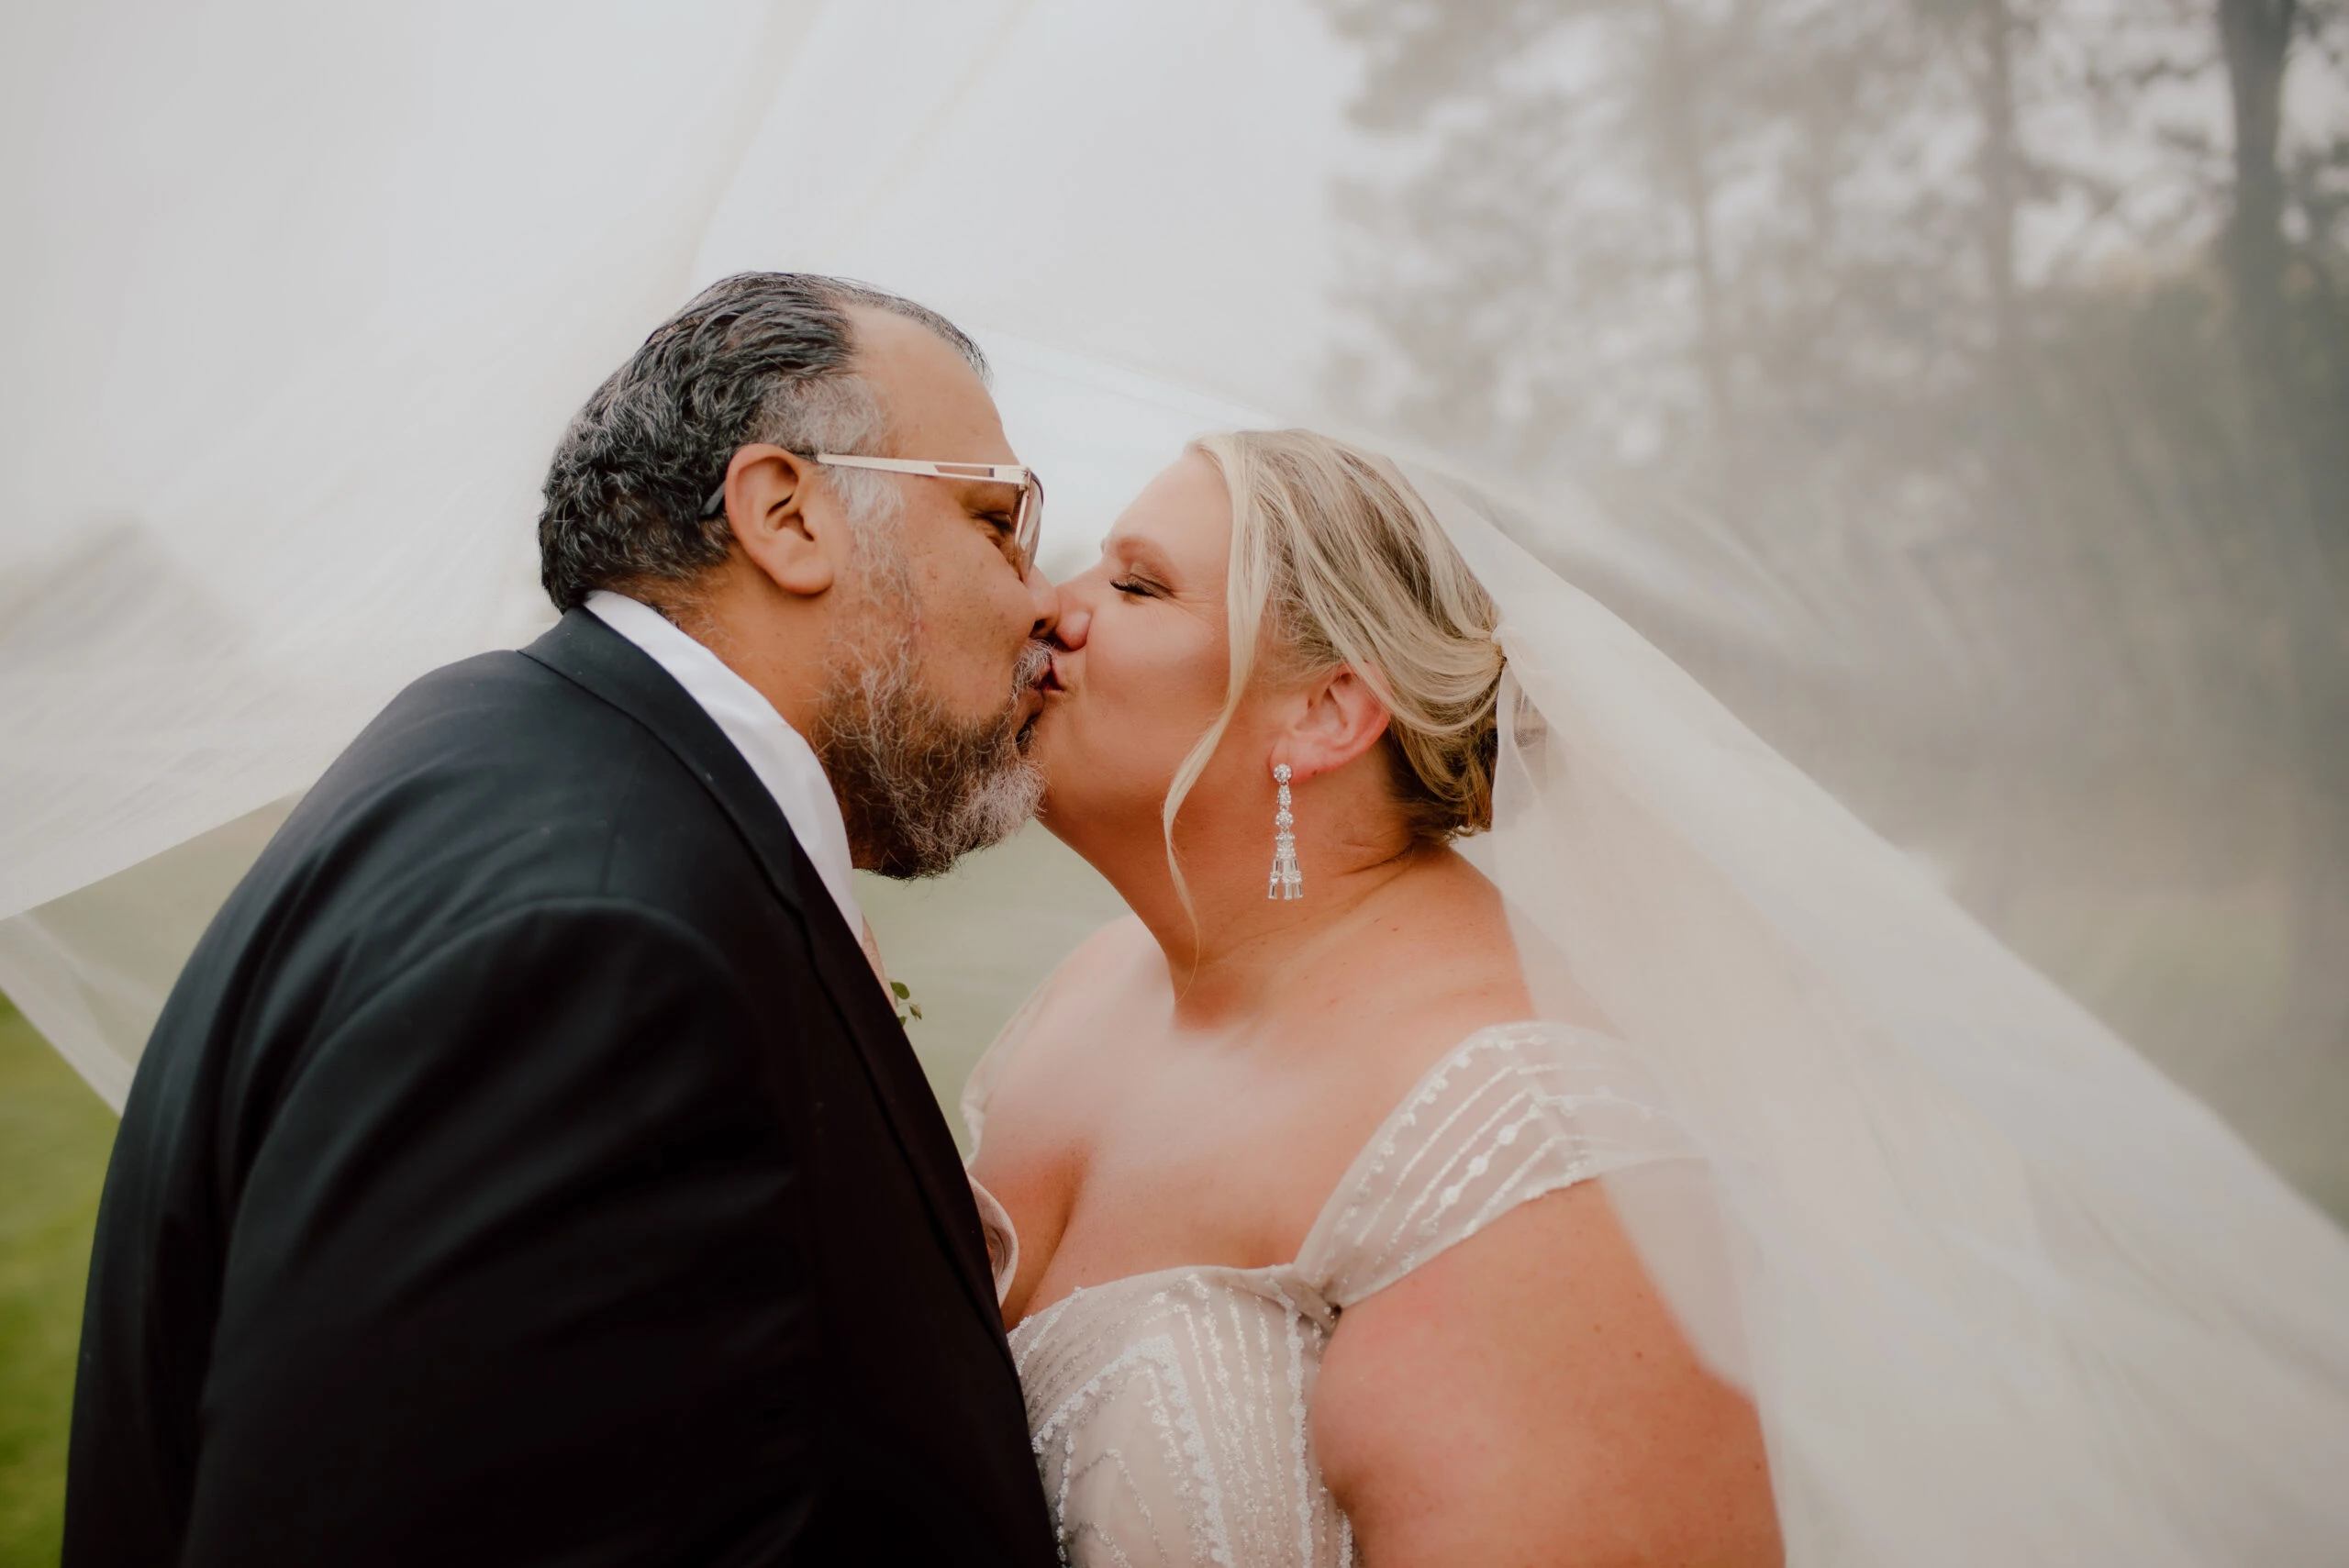 True Bride Meighan and Groom Andres Kissing